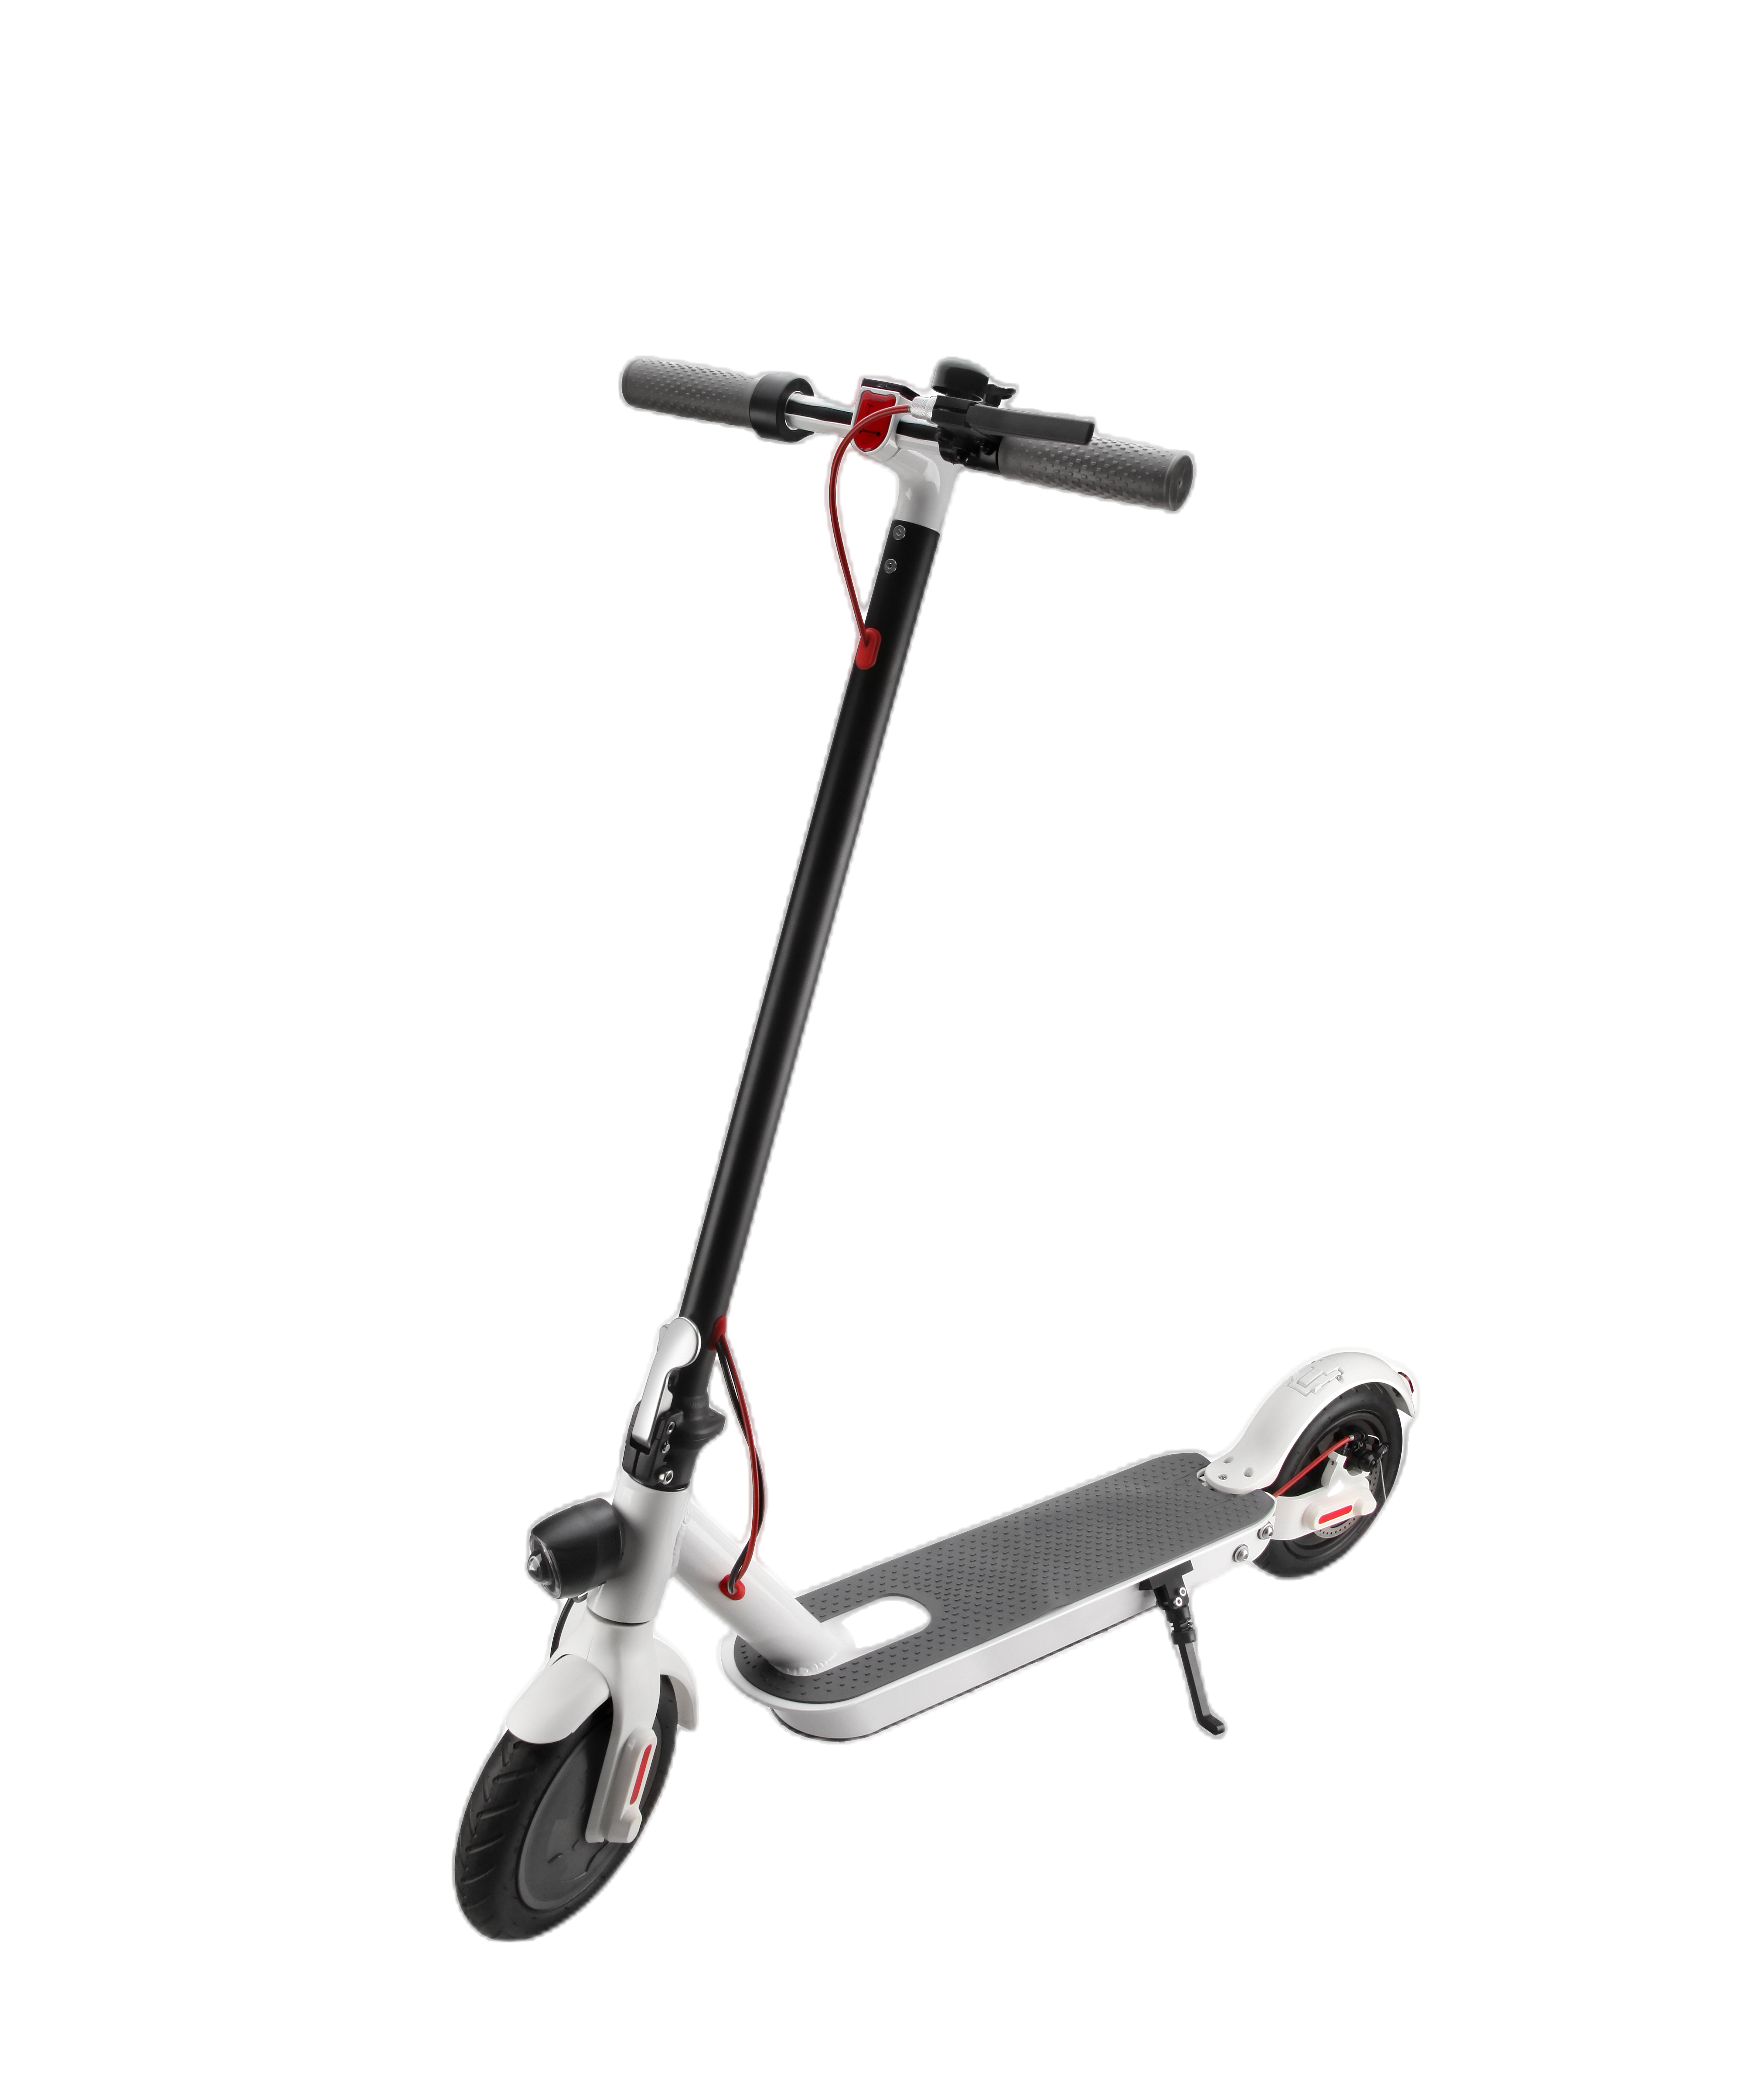 Adult Sized 15 Mph Electric Scooter 